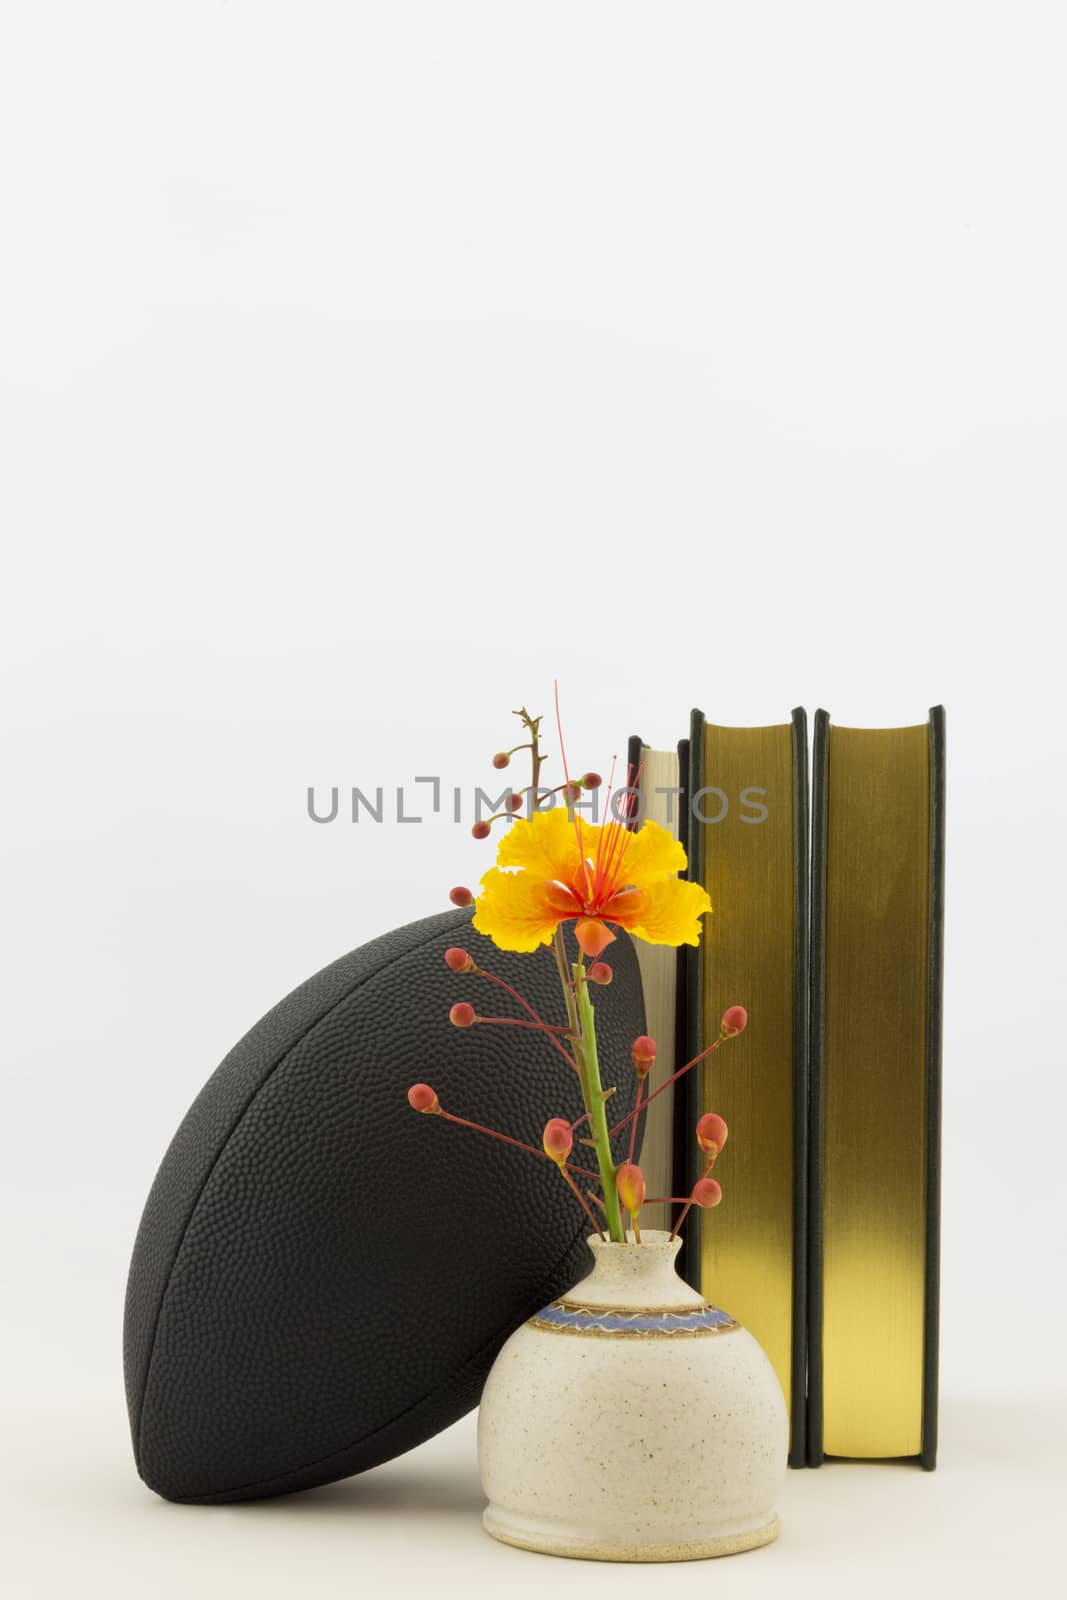 Vertical image with copy space of black football with academic books and bird of paradise flower in vase reflects commitment of successful scholar athletes.  Symbols reflect athletics and education balanced with healthy achievement. 